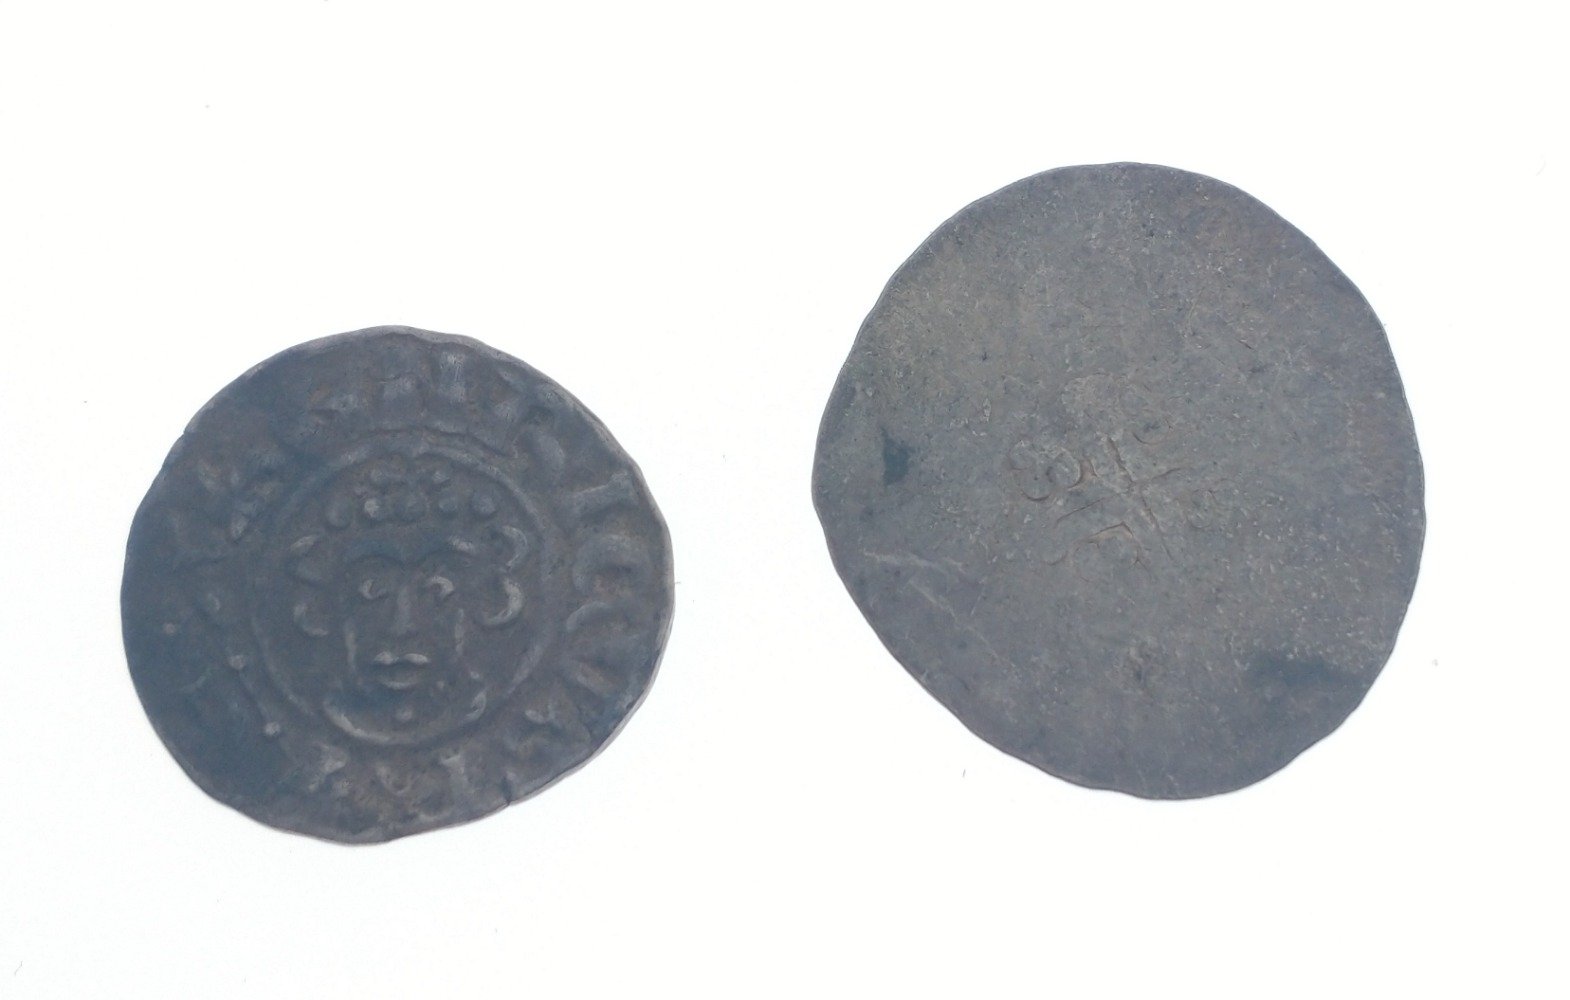 ANCIENT ENGLISH HAMMERED Cnut, penny, short cross type 19-20mm diameter slightly uneven hammered - Image 3 of 4